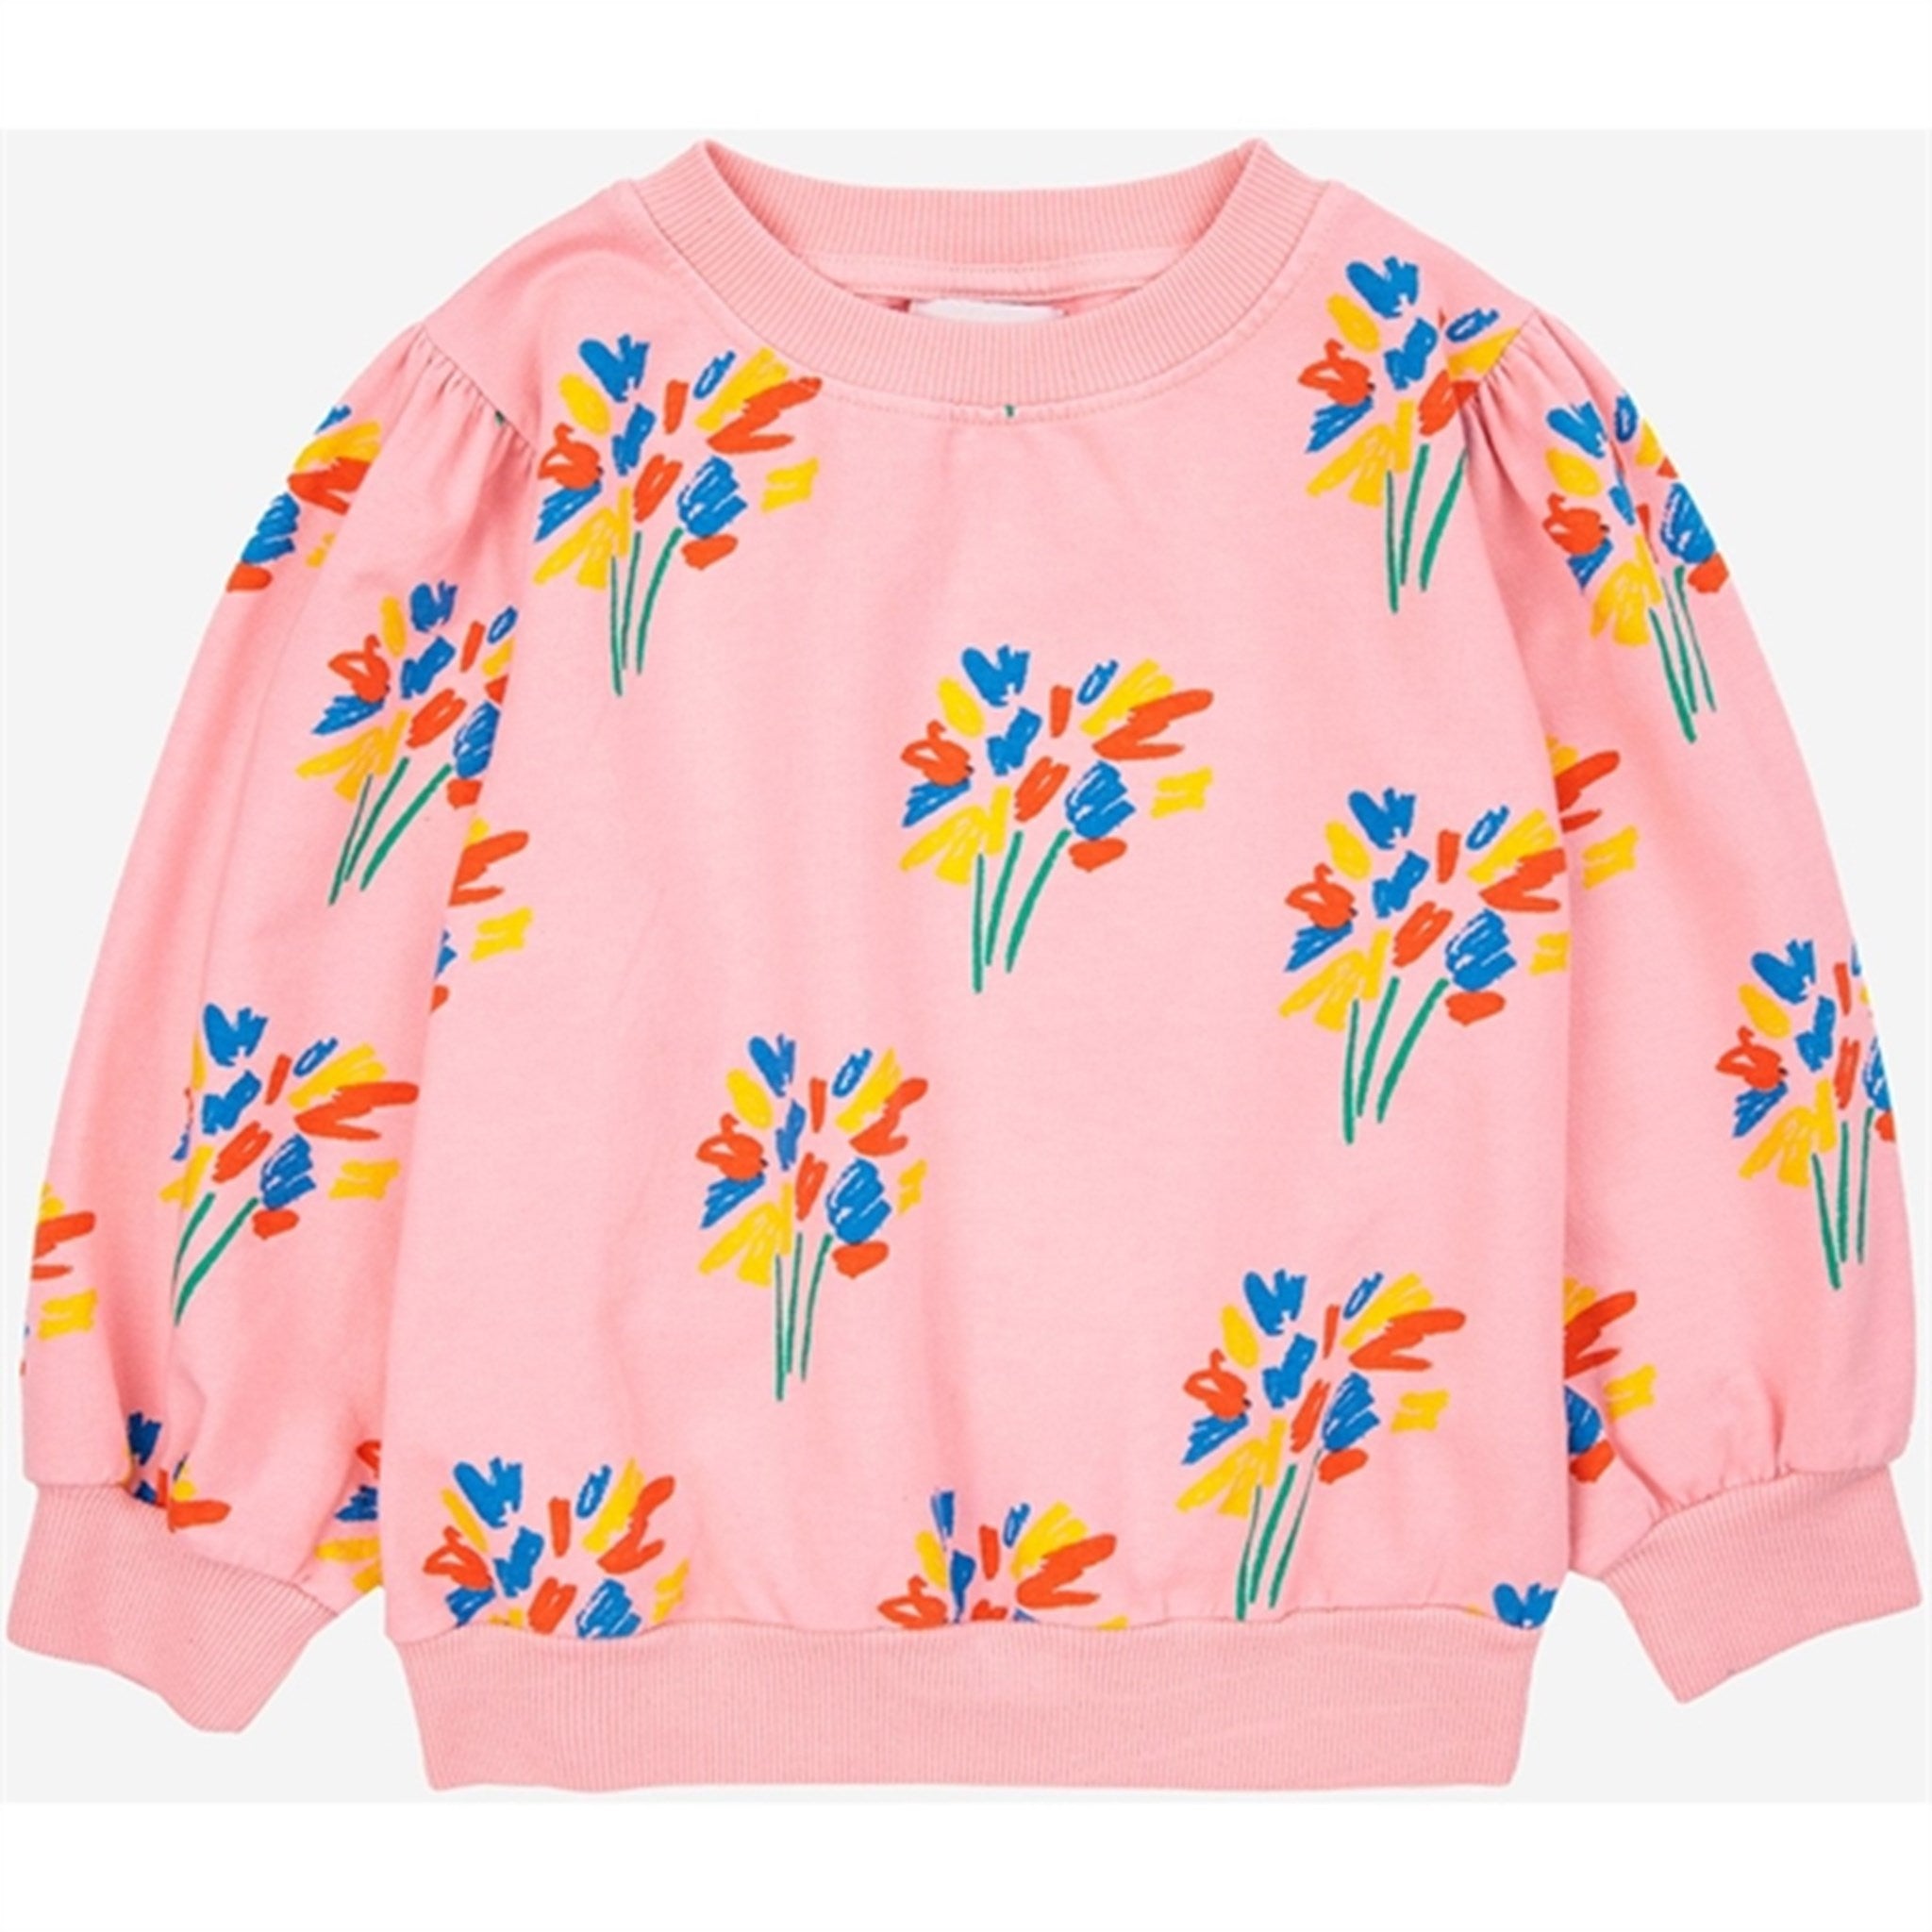 Bobo Choses Fireworks All Over Sweatshirt Round Neck Pink